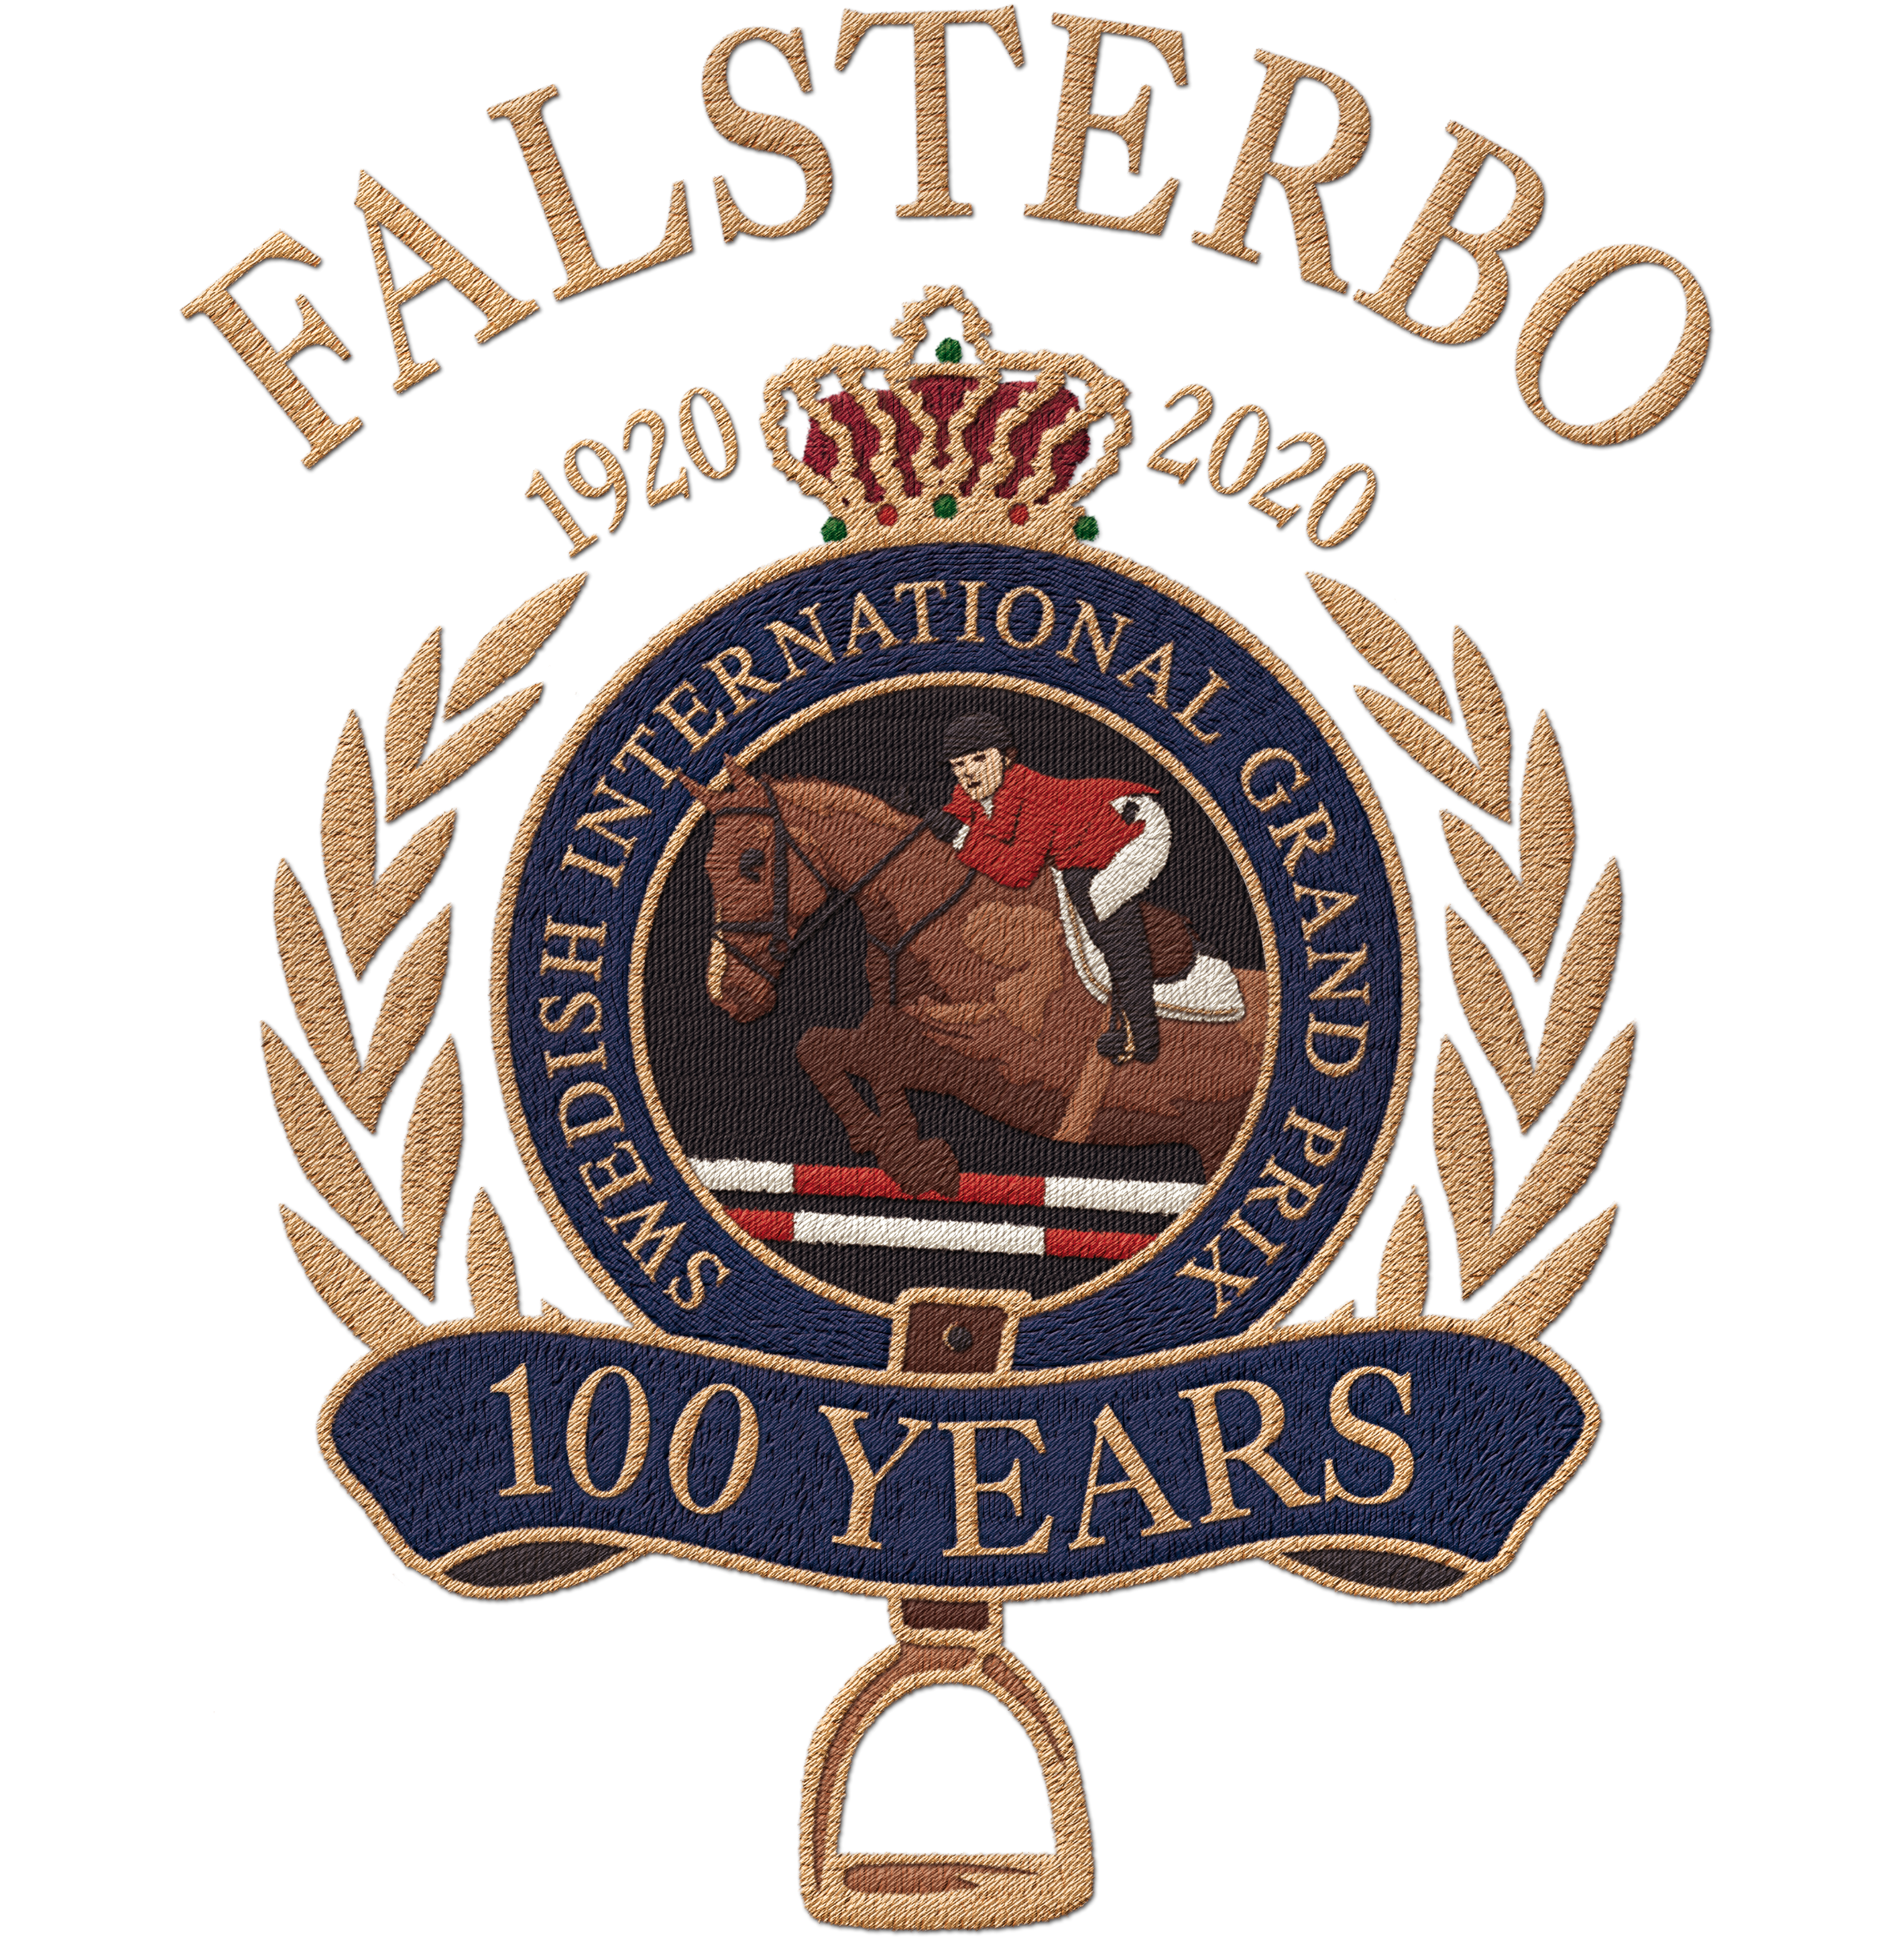 Falsterbo Horse Show 